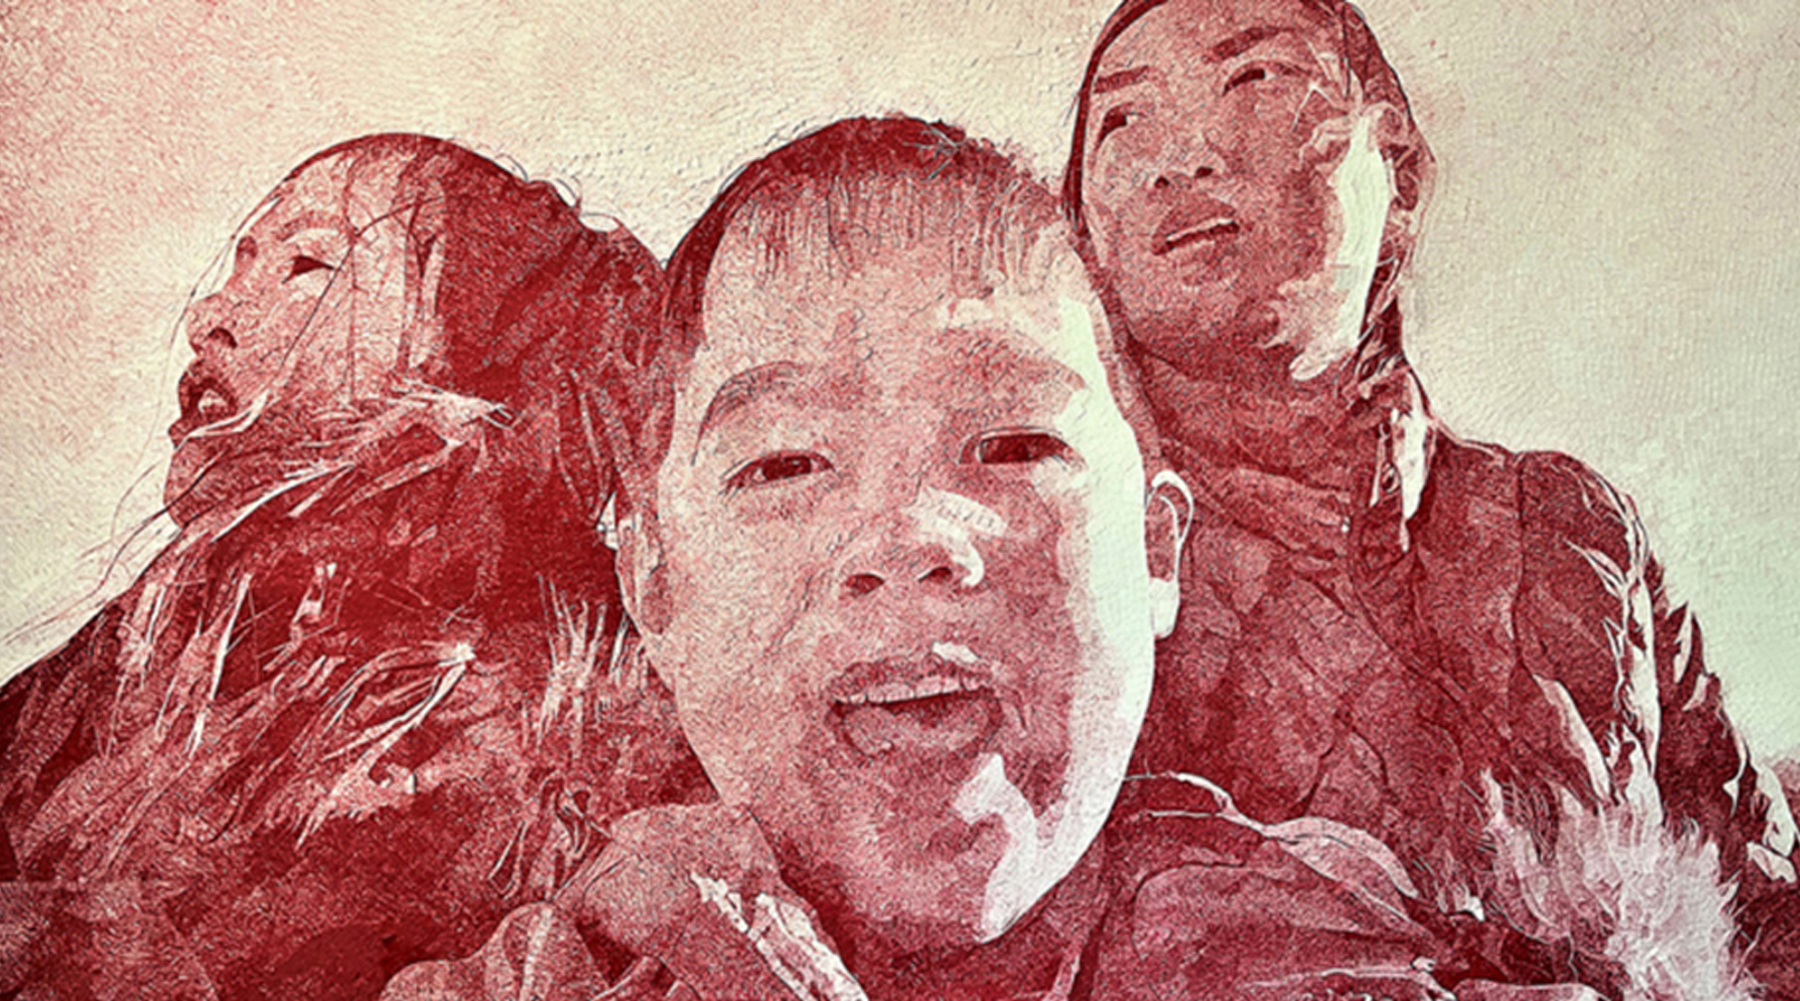 Caren King Choi (b. 1984). “Mt. Rushmore (Nieces & Nephew),” 2020. China marker, graphite, stickers on paper. 36 x 26 in.